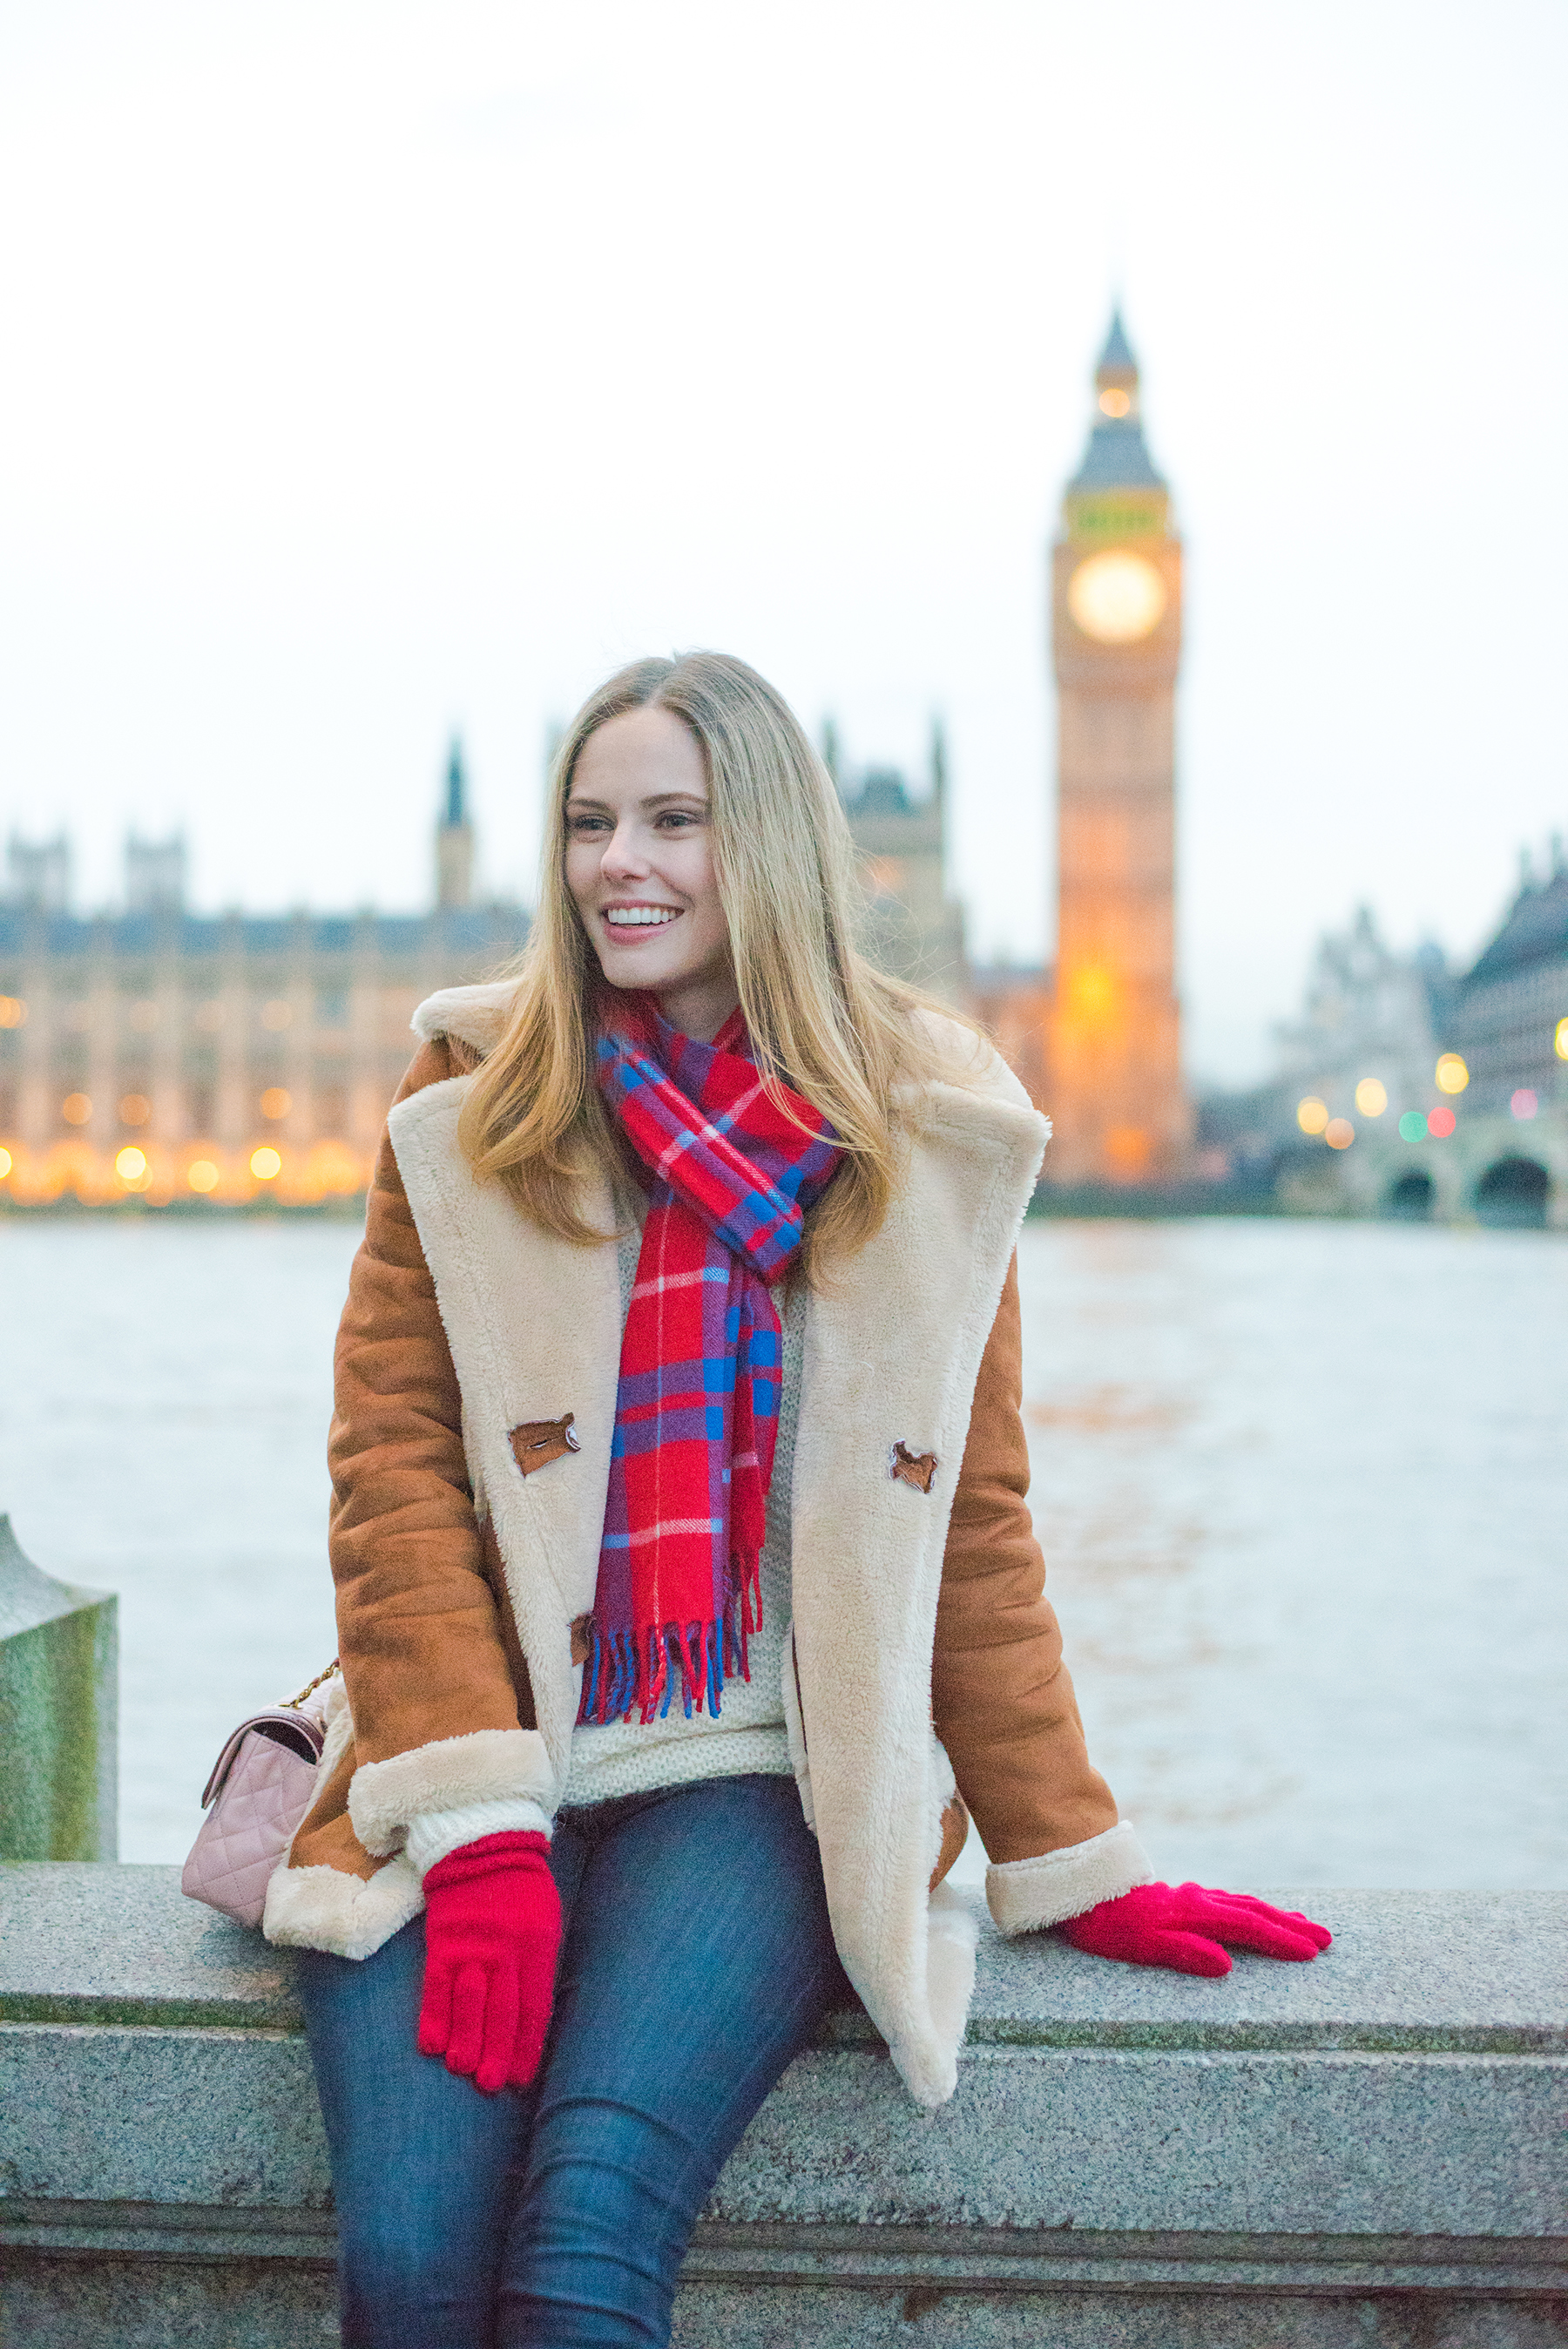 Miss USA 2011 Alyssa Campanella of The A List blog wearing Topshop Faux Shearling Coat at Big Ben in London